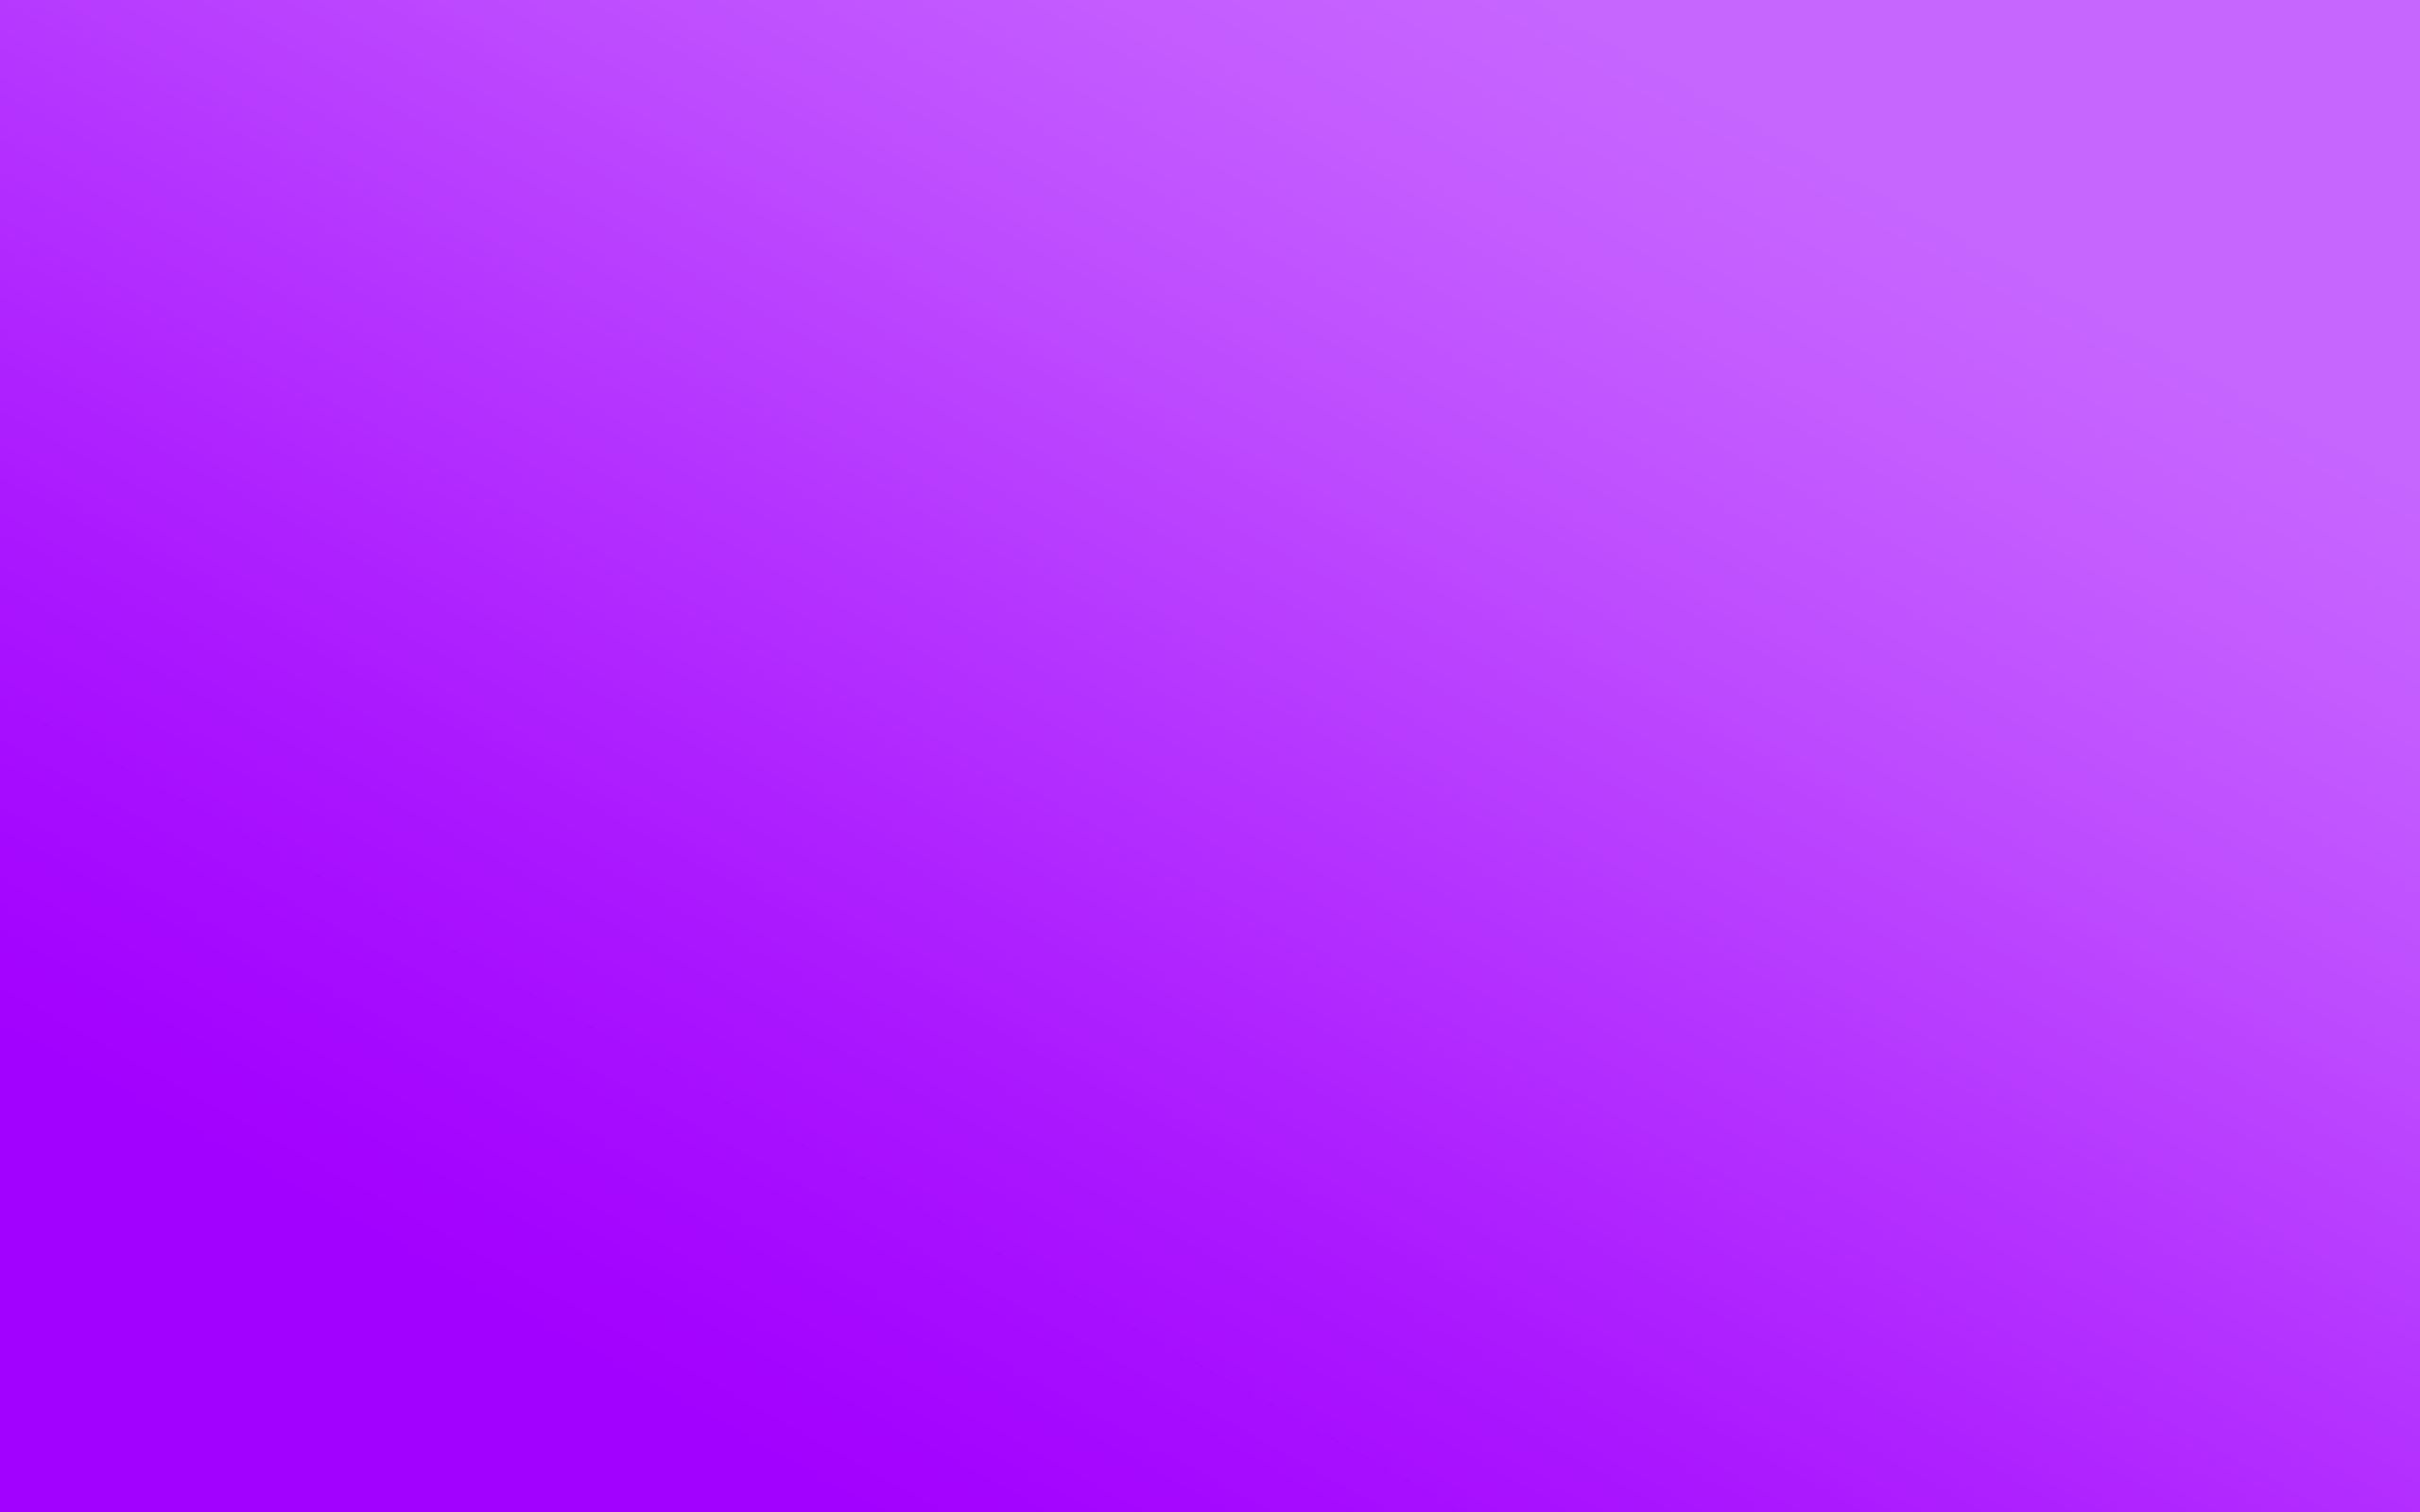 background, bright, abstract, lilac, light, light coloured, solid UHD